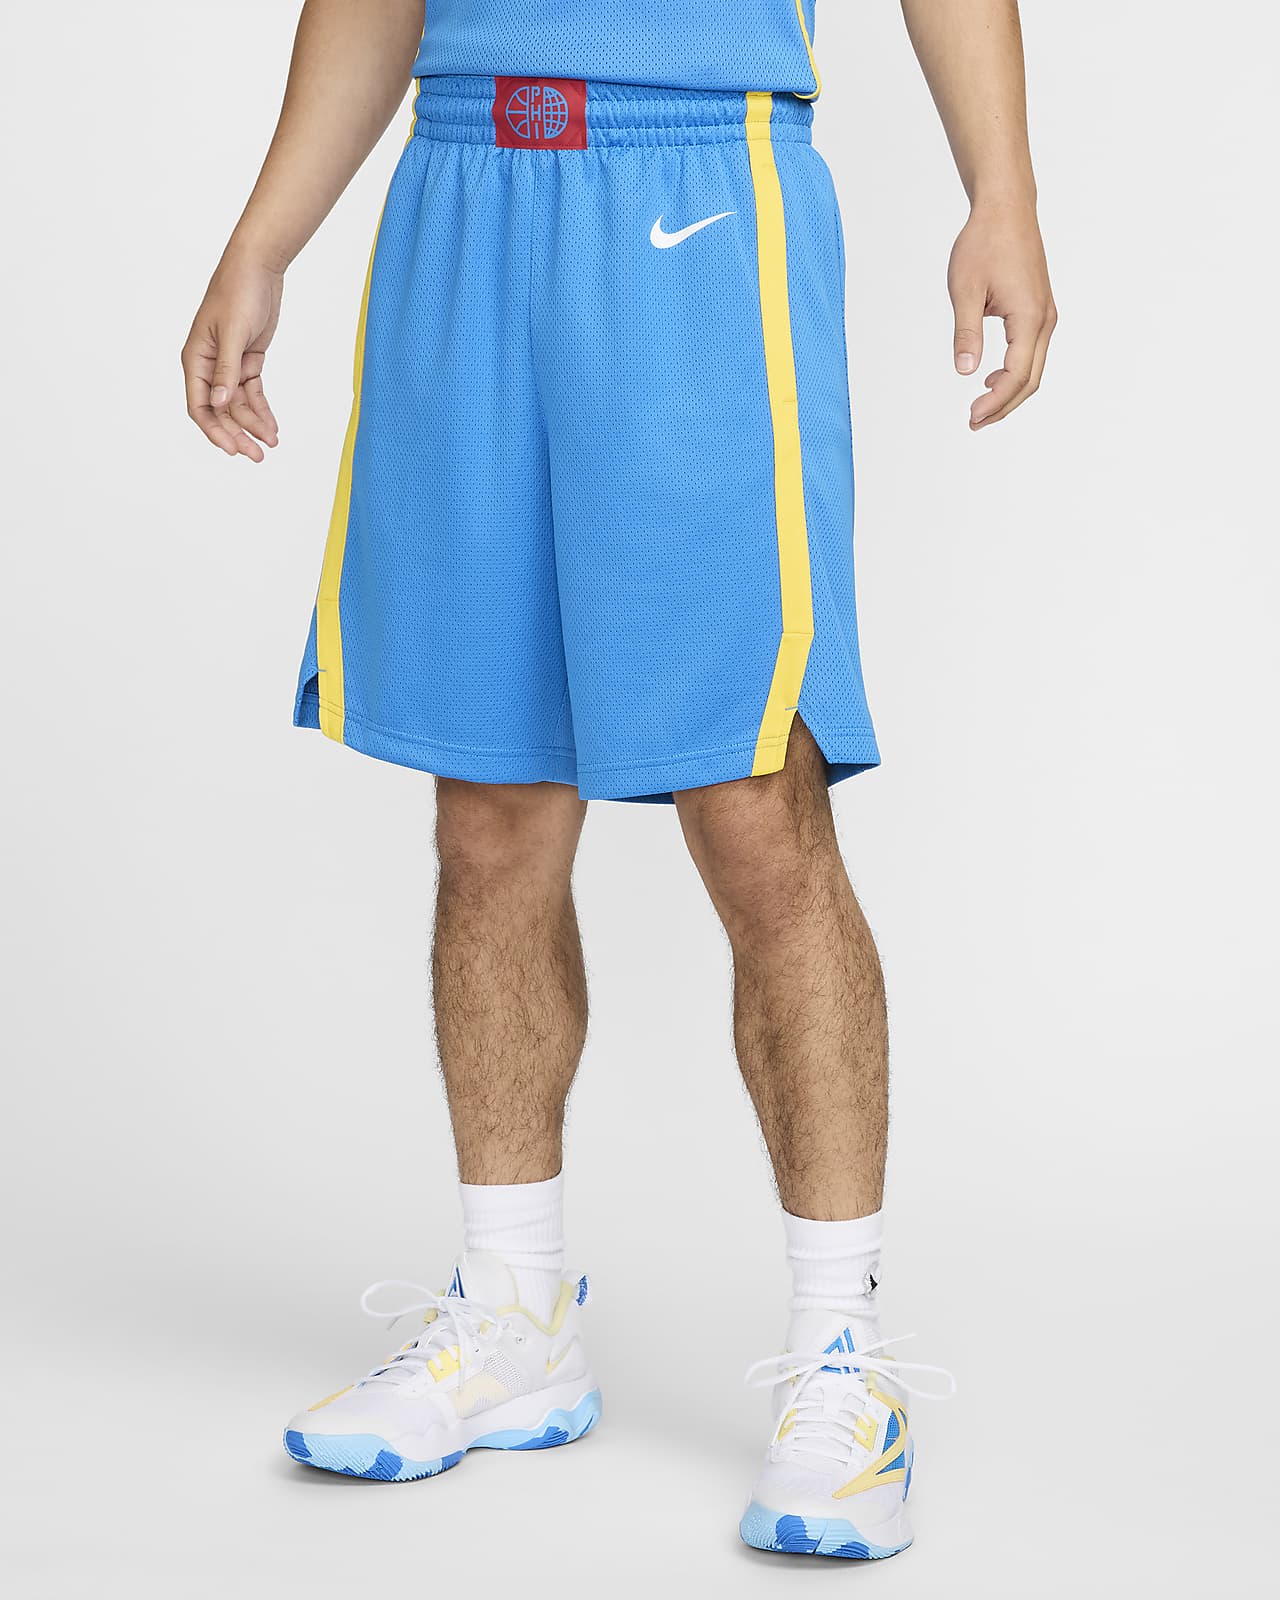 Philippines Limited Road Men's Nike Basketball Shorts